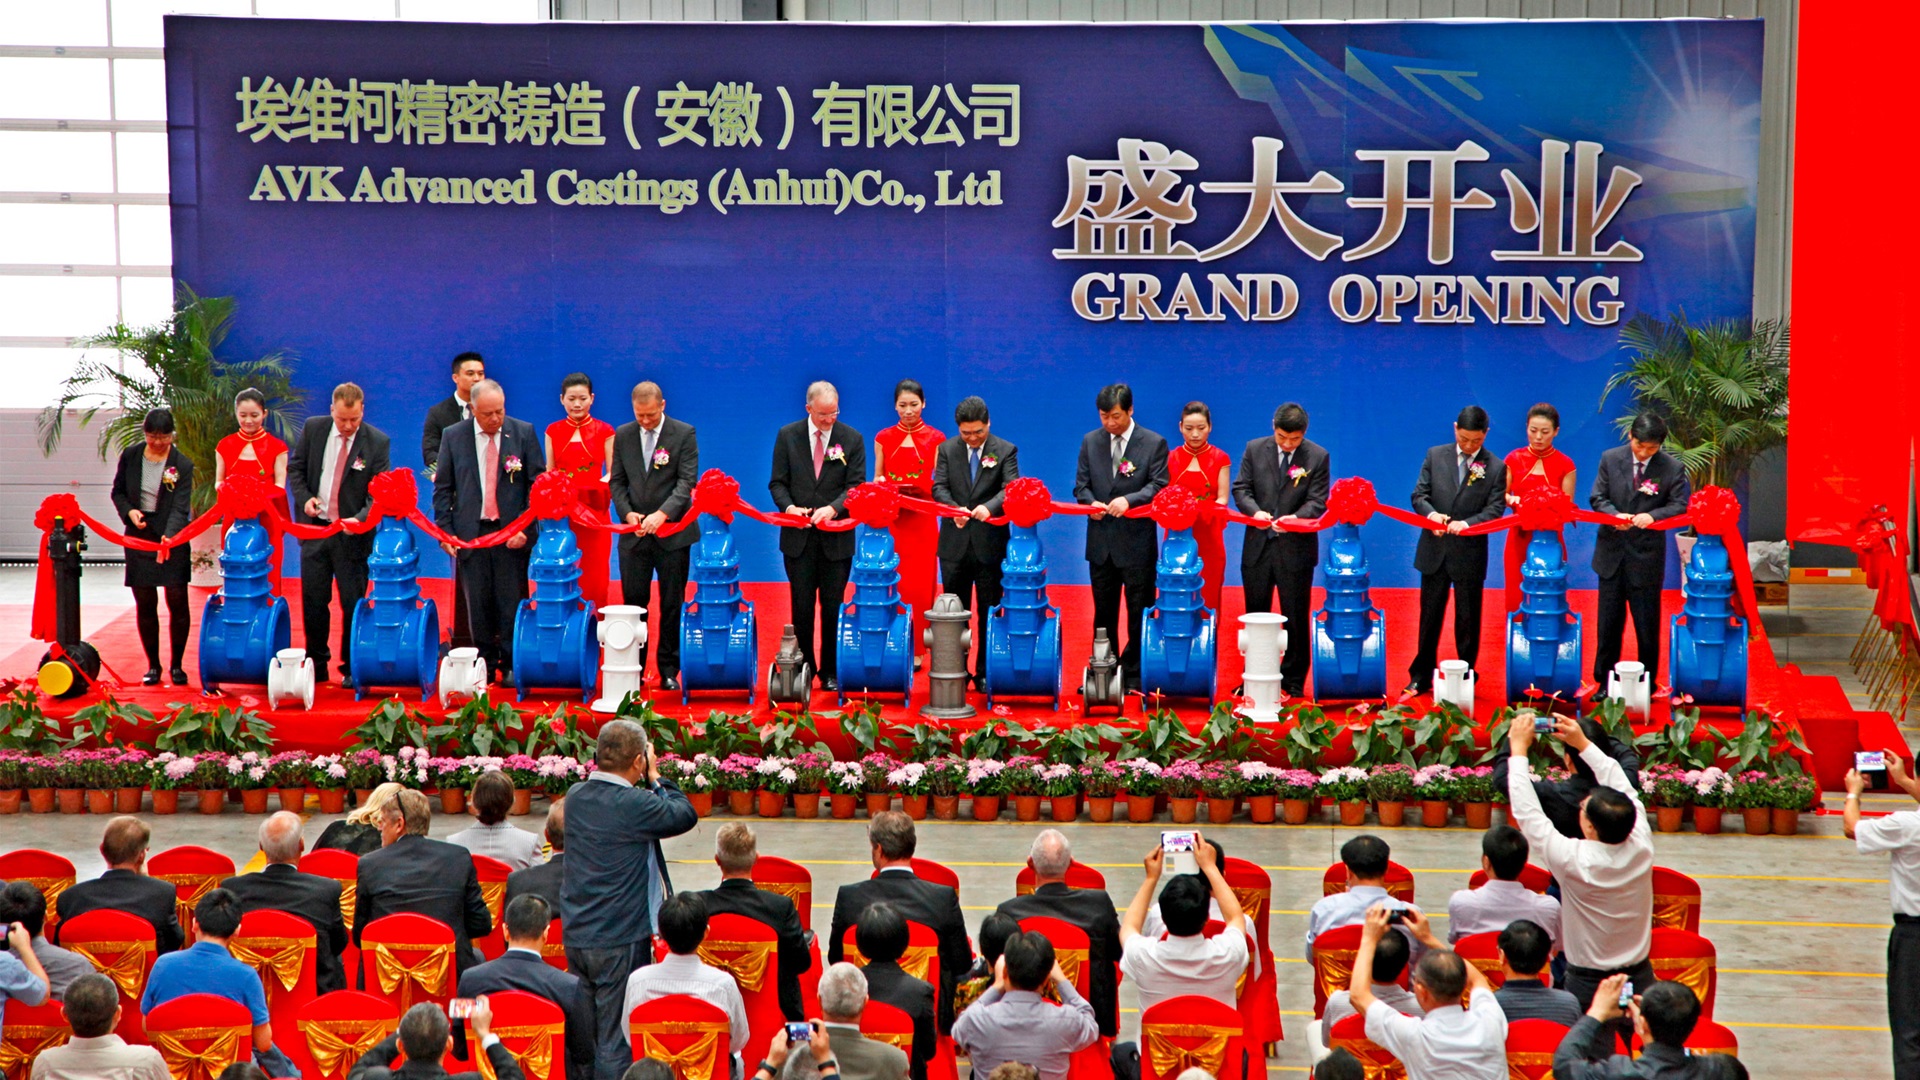 AVK Advanced Castings opening in China